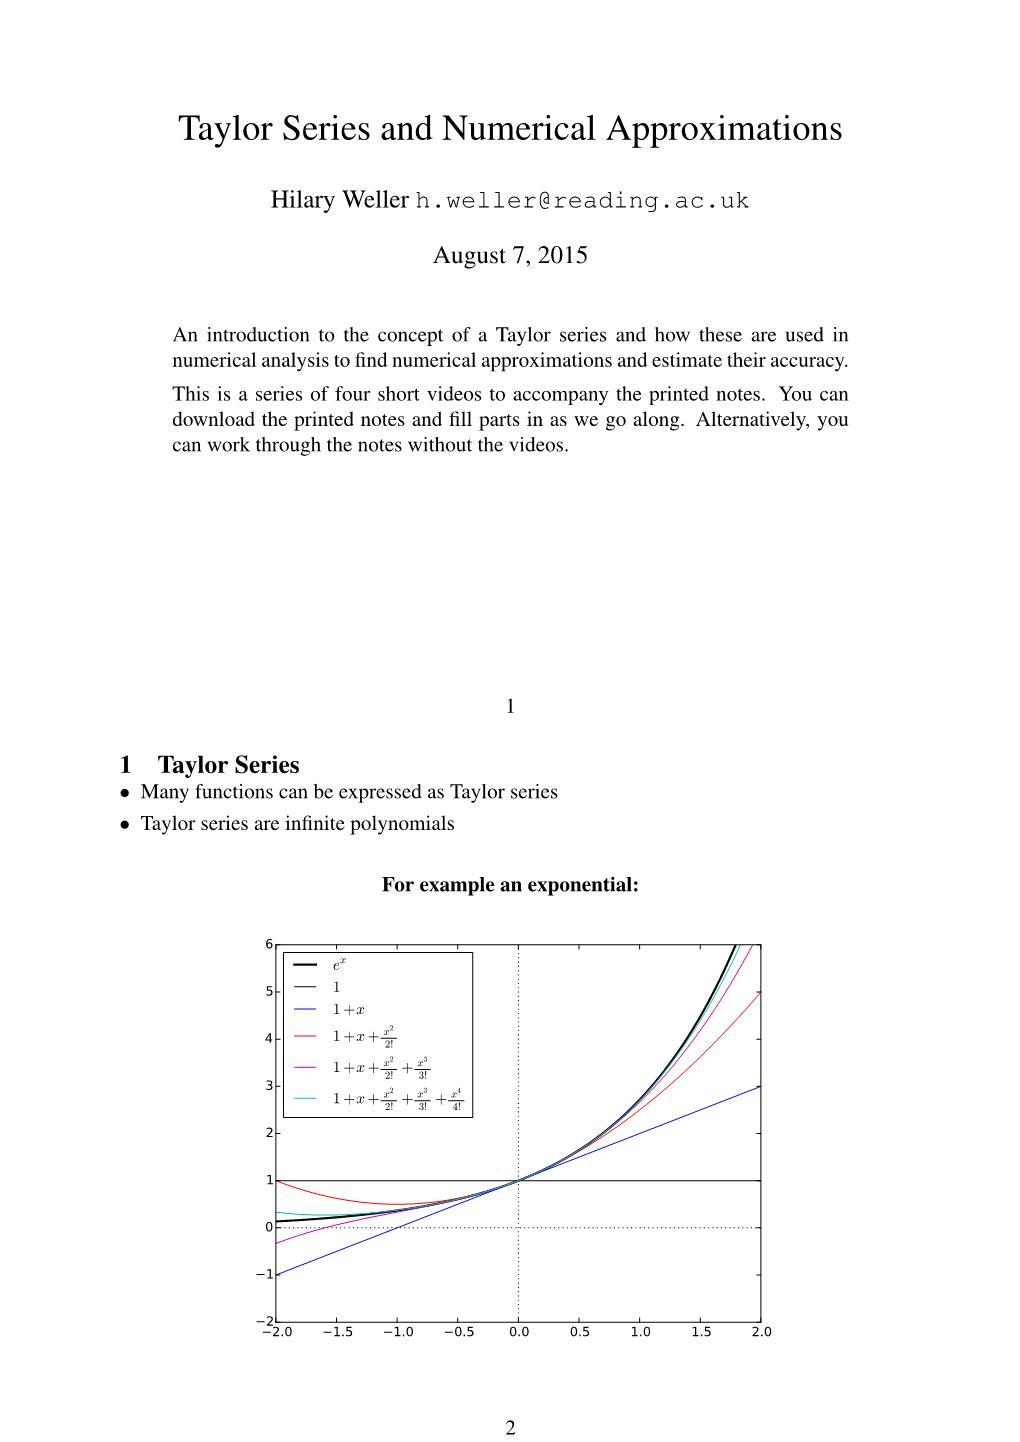 Taylor Series and Numerical Approximations